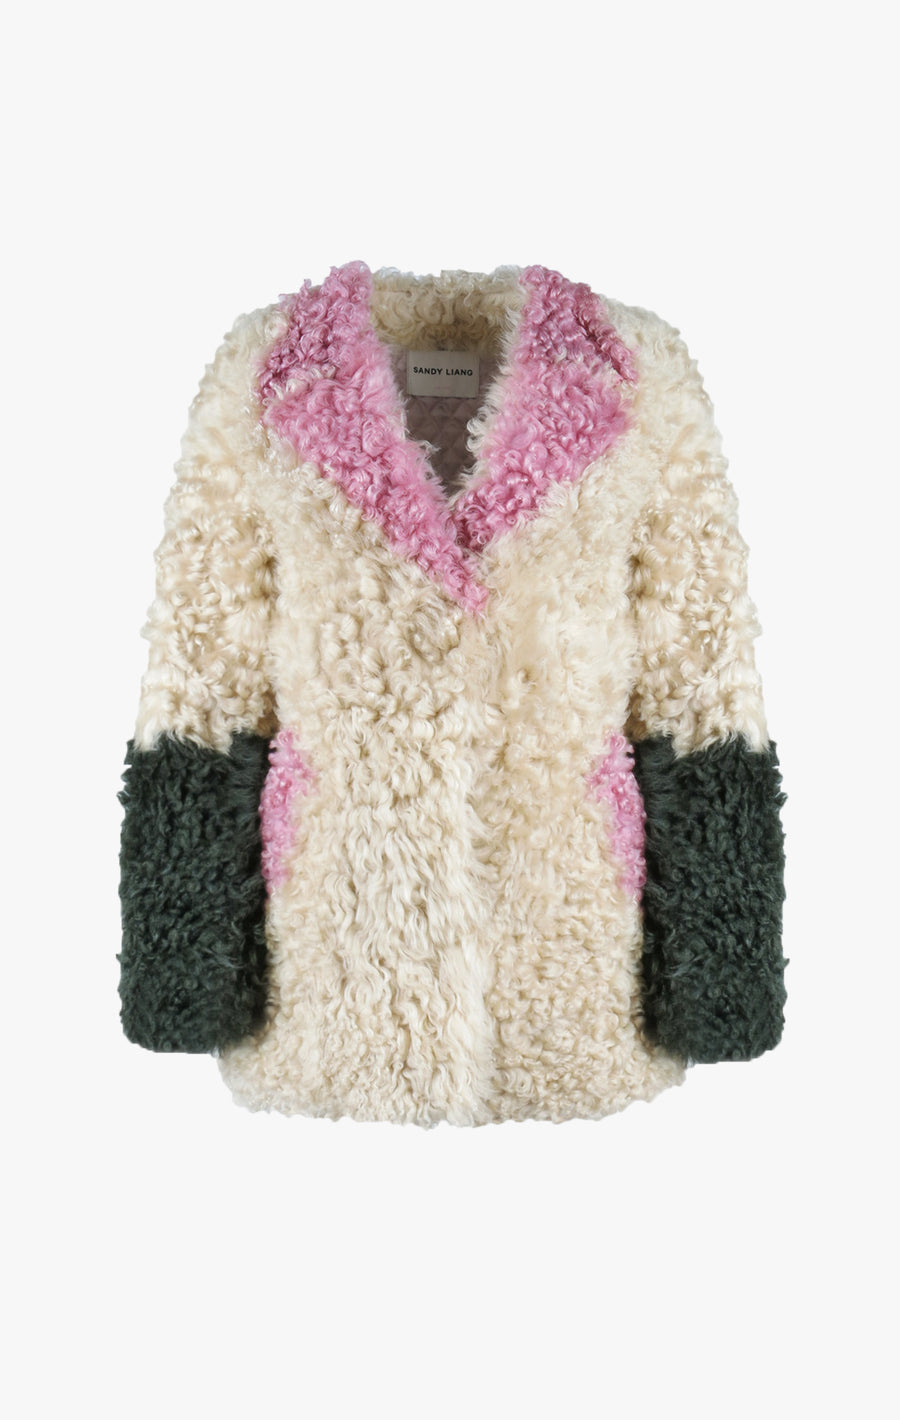 Shearling coat with contrast pink, cream, and green details